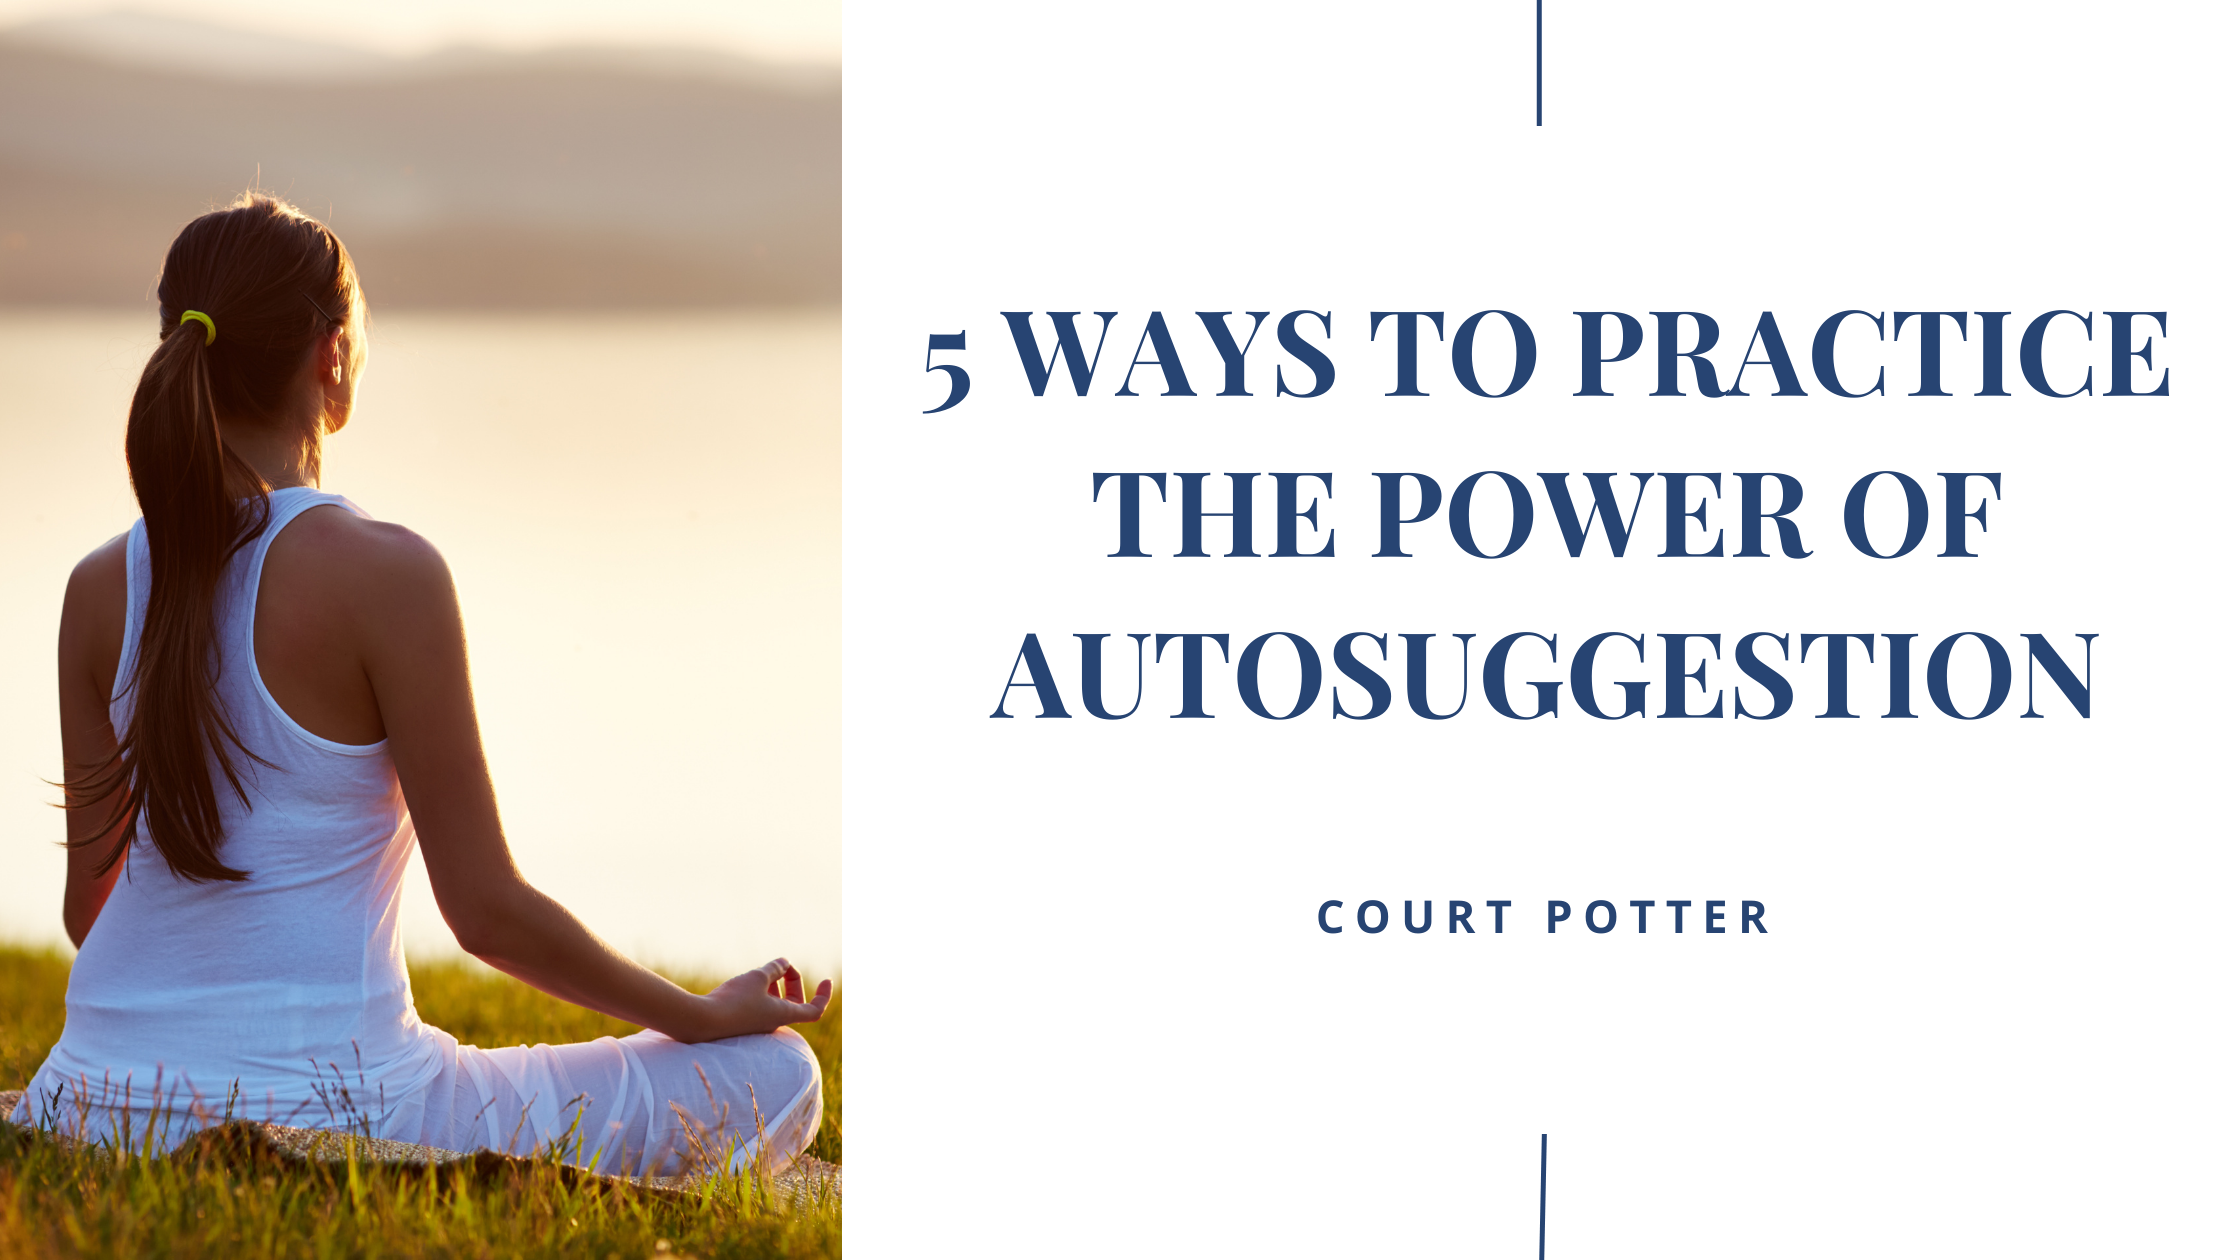 5 WAYS TO PRACTICE THE POWER OF AUTOSUGGESTION